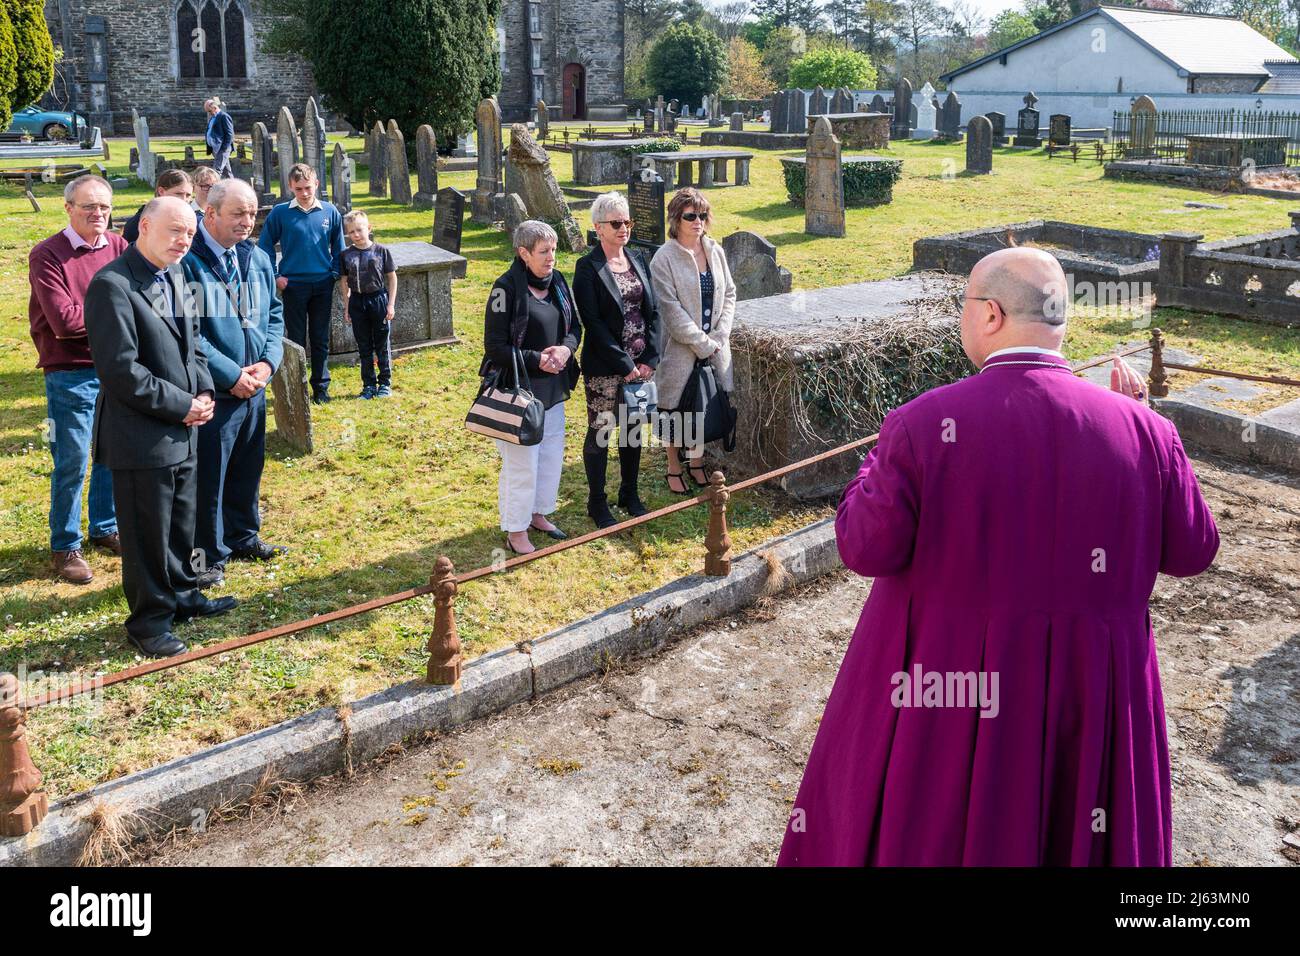 Dunmanway, West Cork, Ireland. 27th Apr, 2022. Today is the 100th Anniversary of the Bandon Valley killings, where 3 men from Dunmanway were shot dead. Bishop of Cork, Cloyne and Ross, Dr. Paul Colton, speaks before laying a wreath on the grave of 72 year old victim Francis Fitzmaurice. Credit: AG News/Alamy Live News Stock Photo